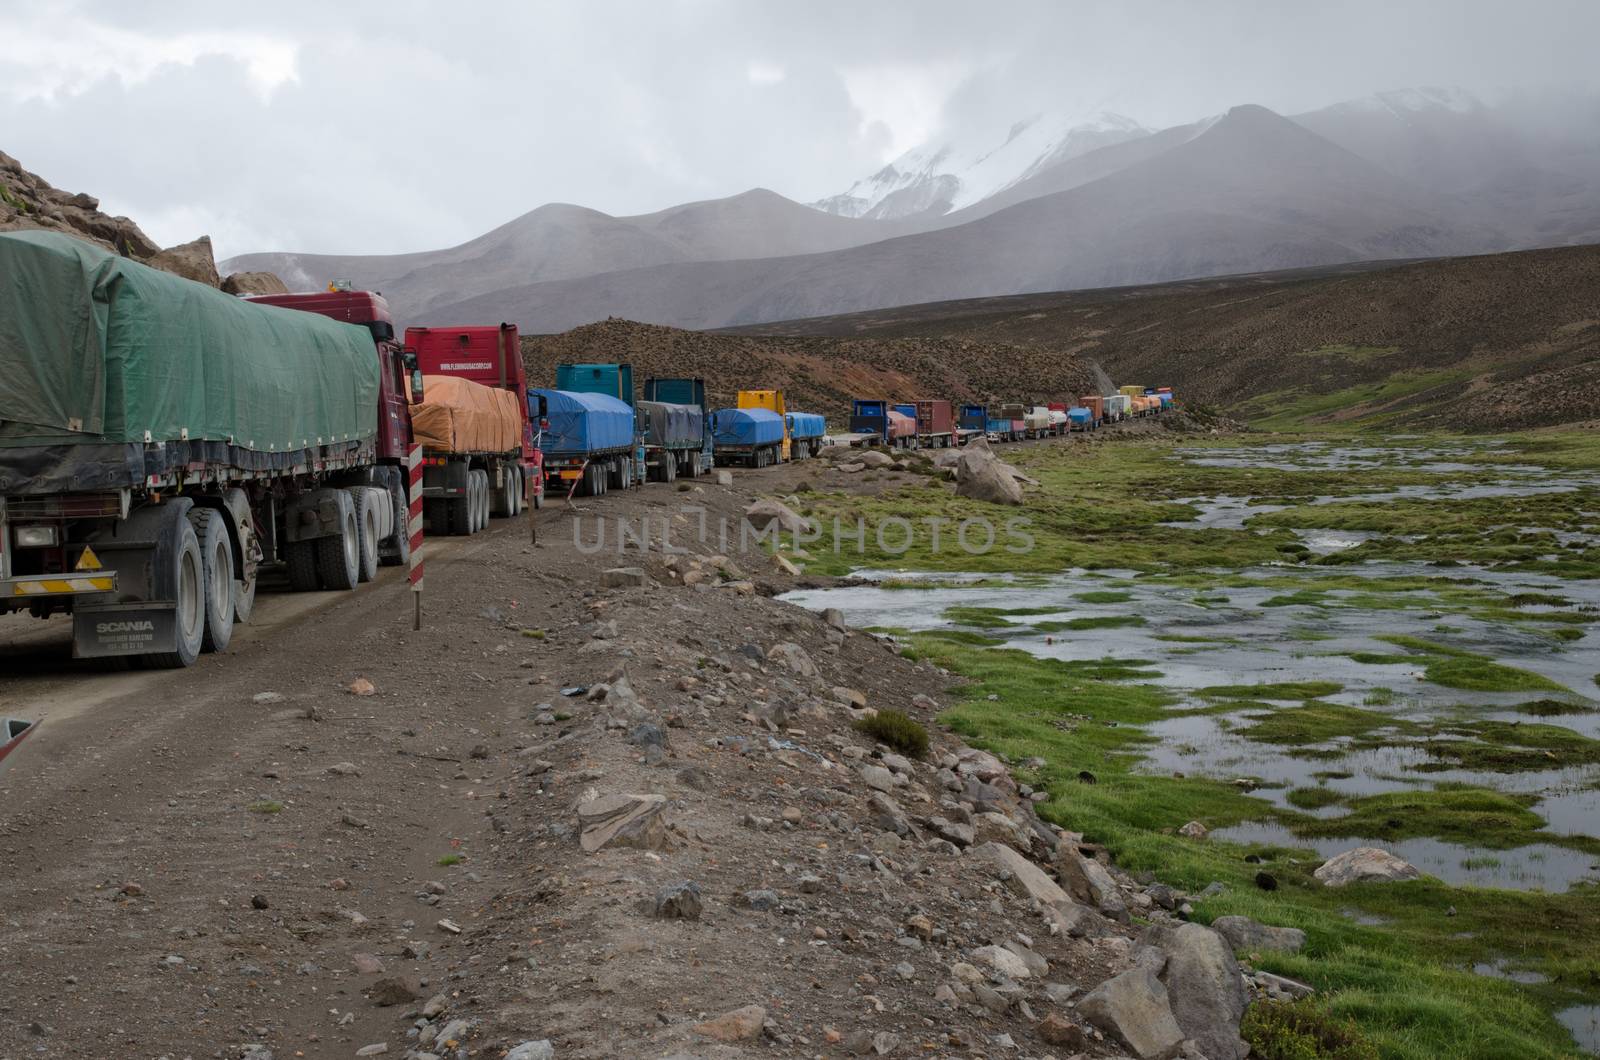 Retention trucks because of road works in Lauca National Park. by VictorSuarez